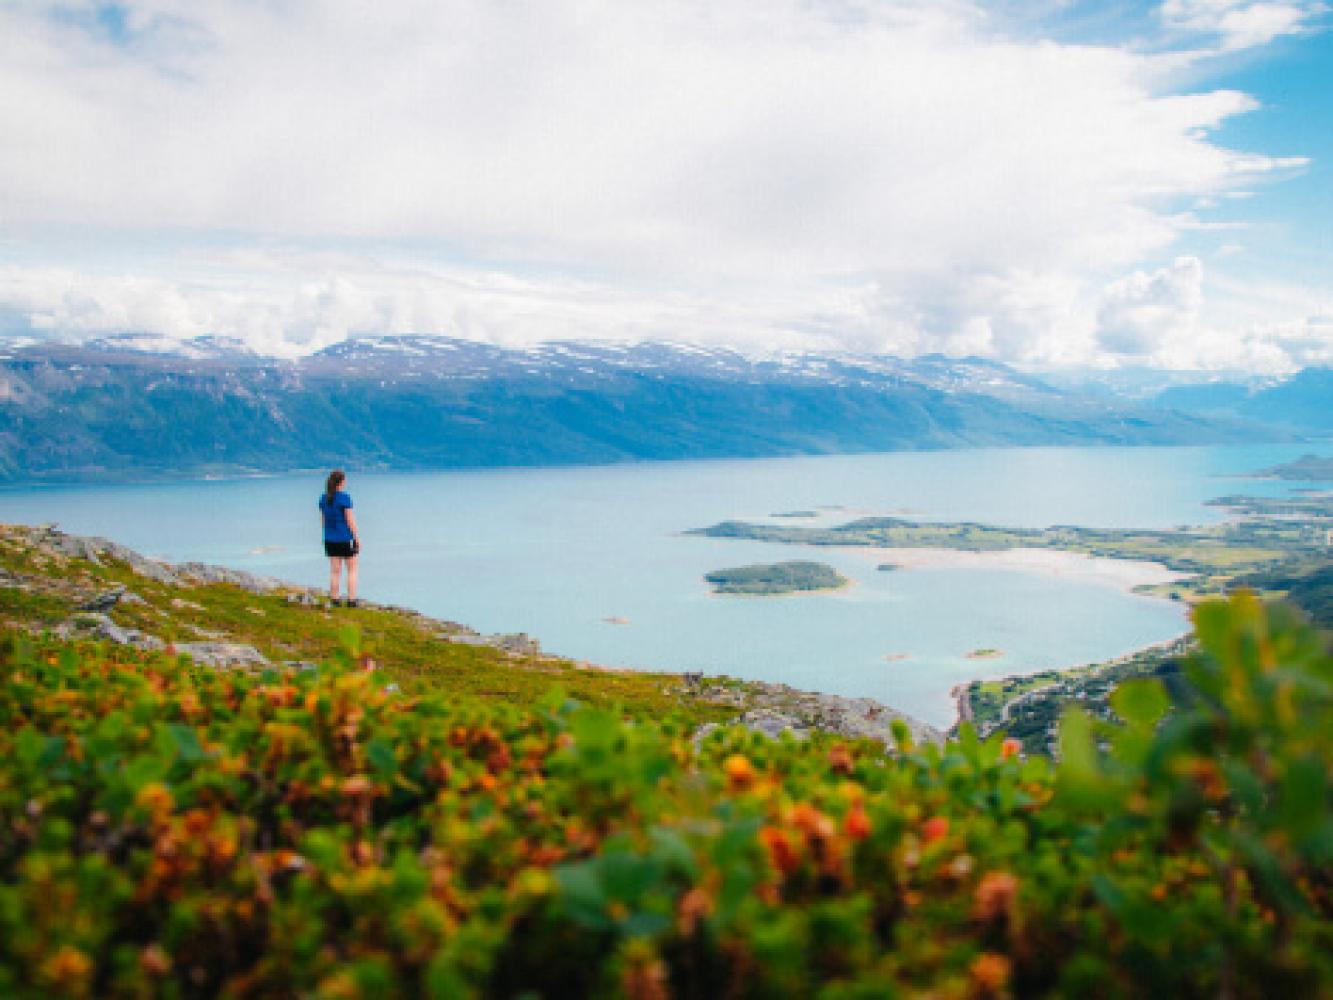 Person enjoying the view from a mountain top in the Tromso region